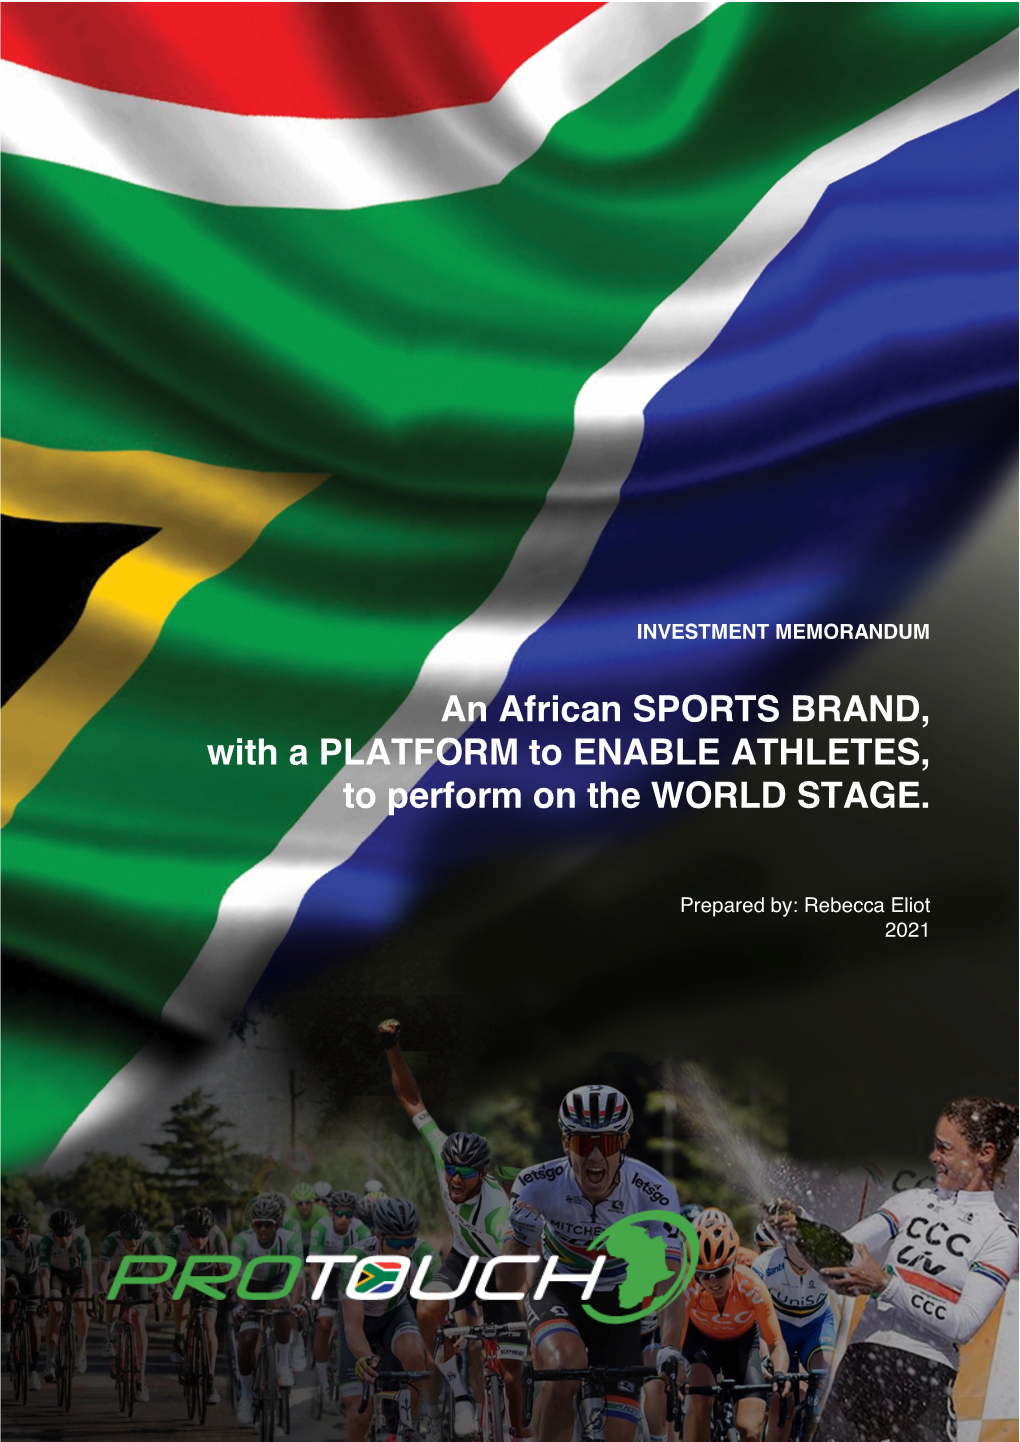 An African SPORTS BRAND, with a PLATFORM to ENABLE ATHLETES, to Perform on the WORLD STAGE